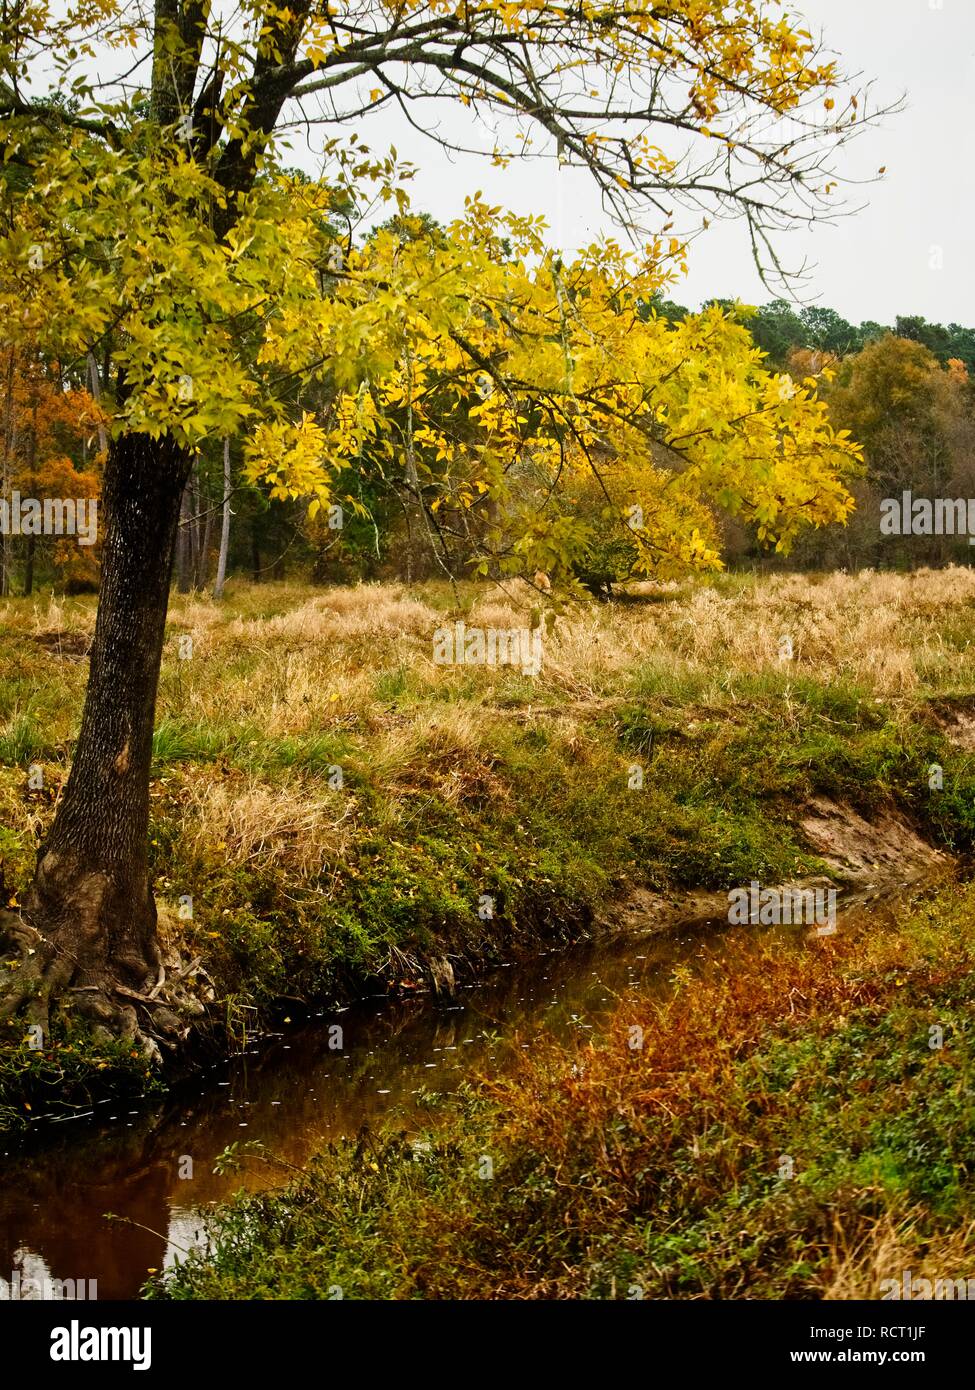 The Woodlands TX USA - 11/28/2018  -  Yellow Tree by Creek Stock Photo